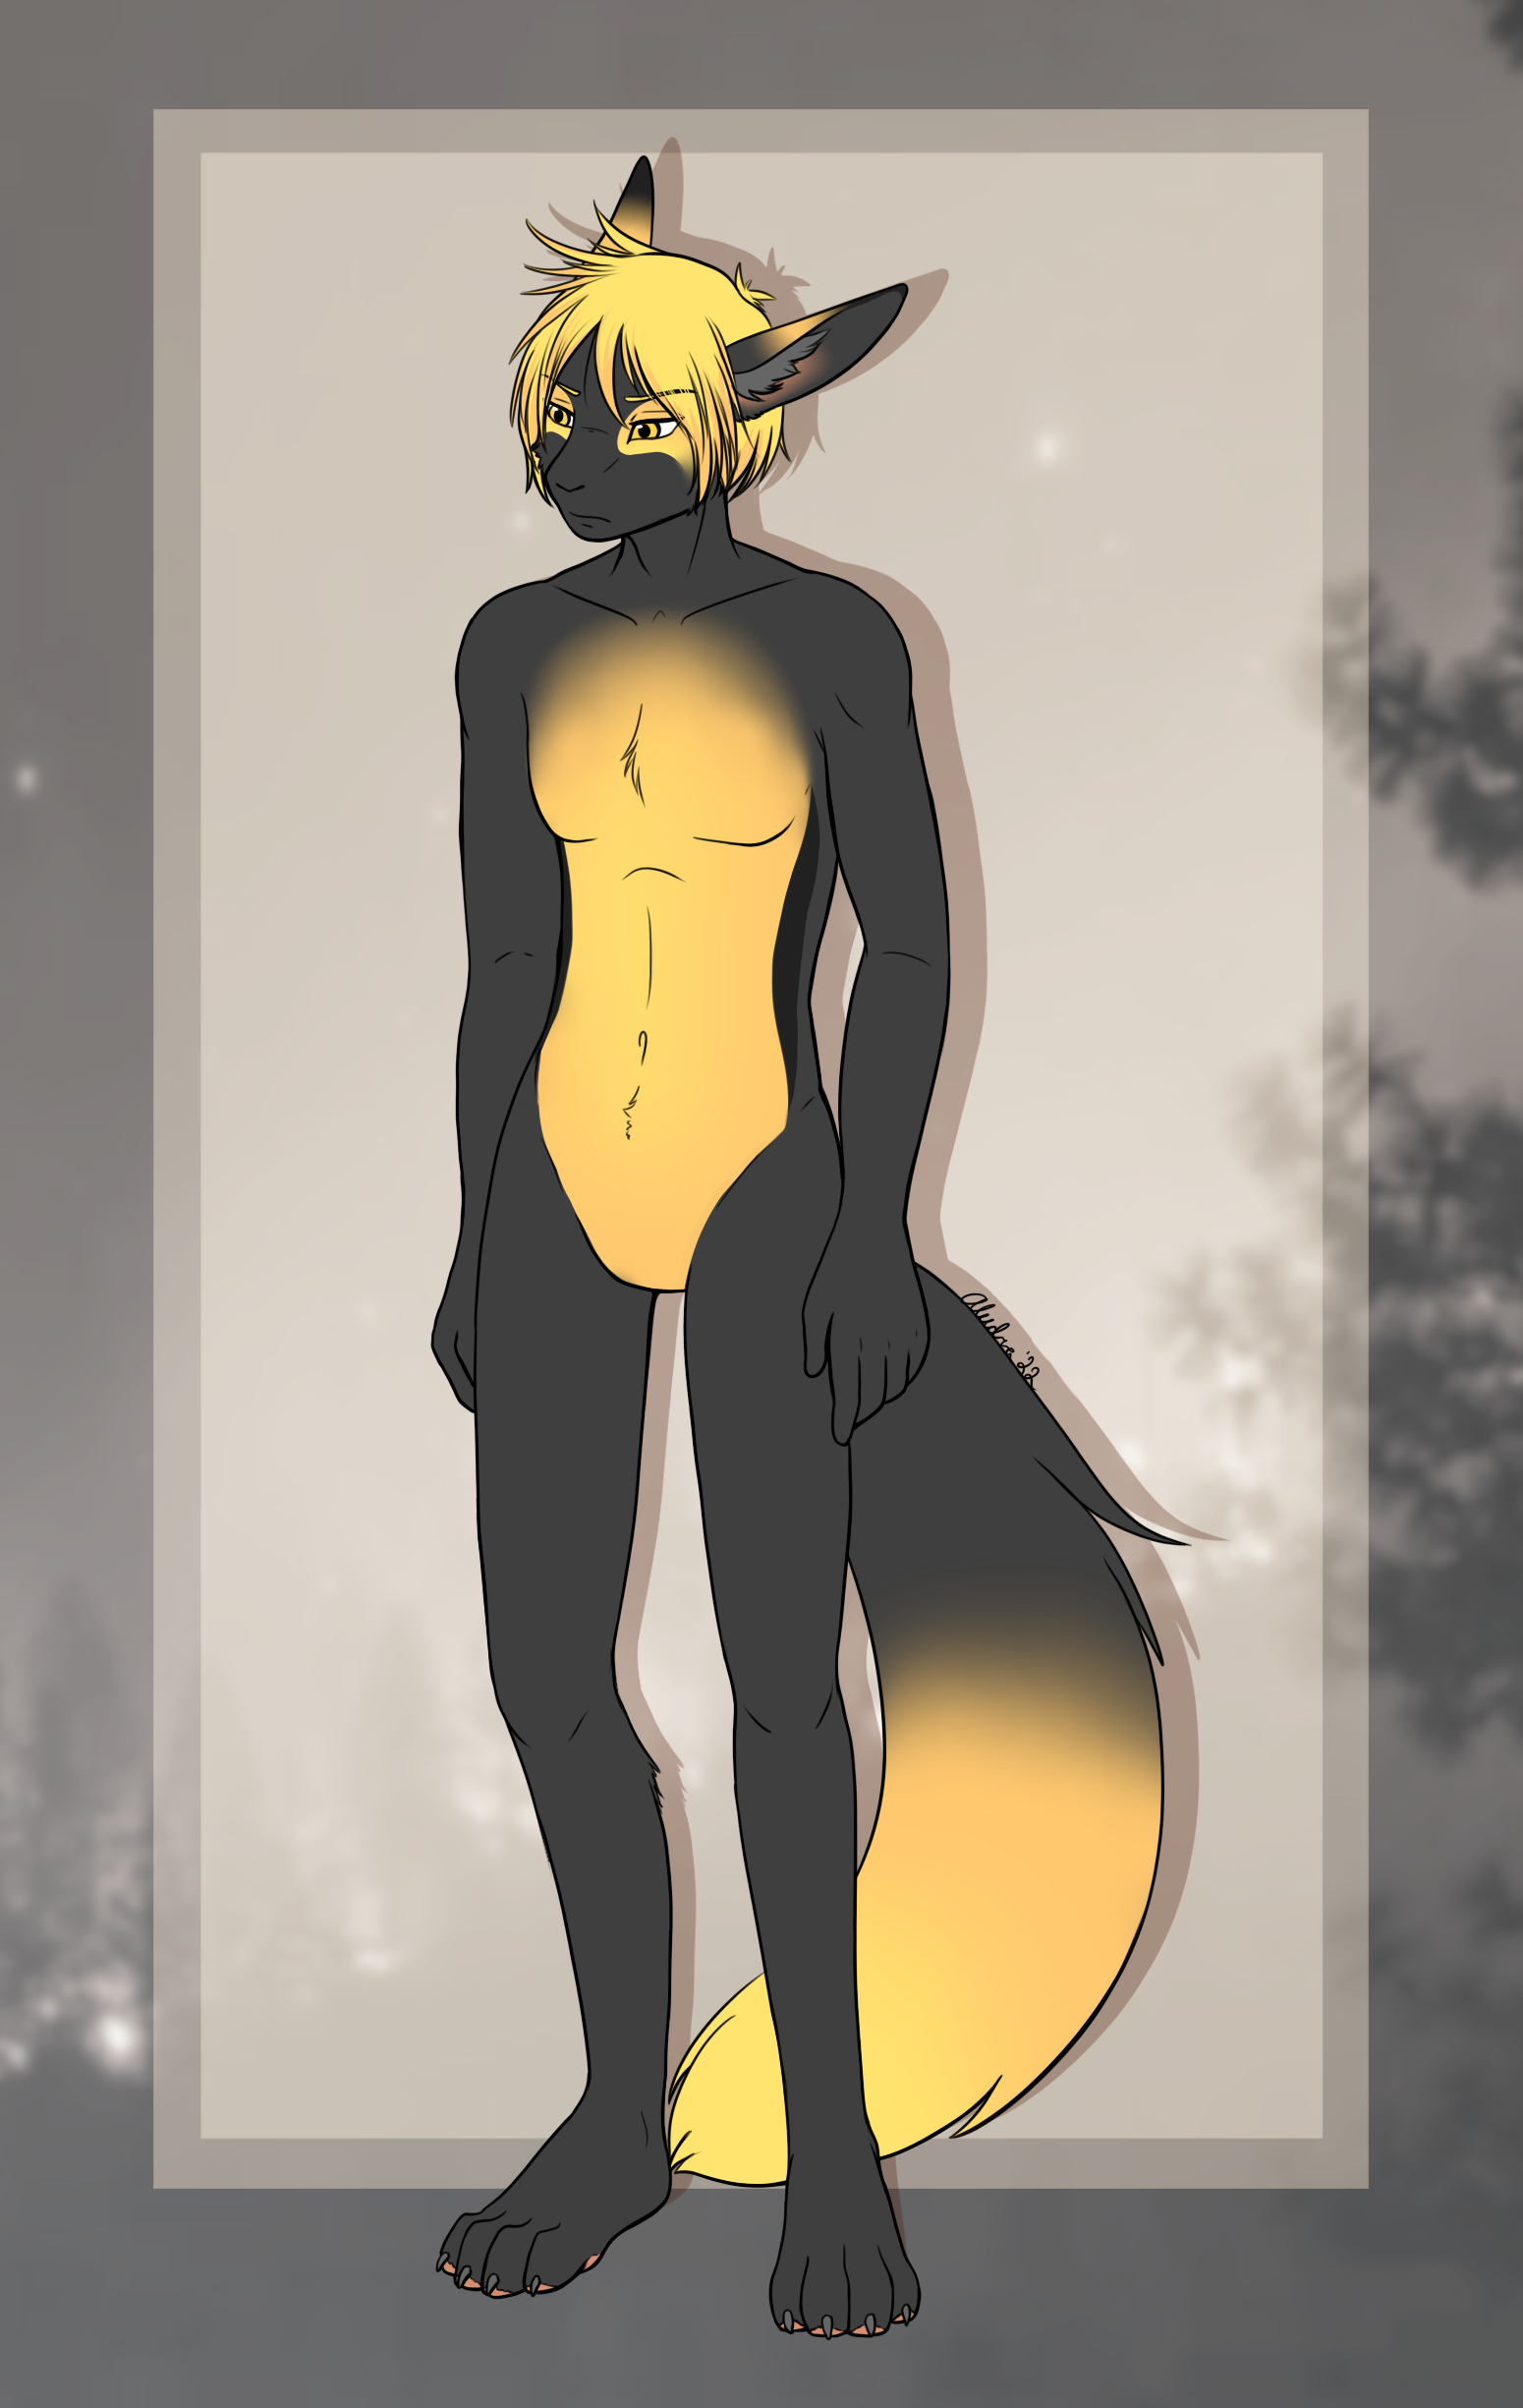 Content Warning: Nudity. A reference for Clintz, showing off his fullbody color scheme. <br>He has a slouched posture and slightly defined muscles, which are normally hidden by clothing.